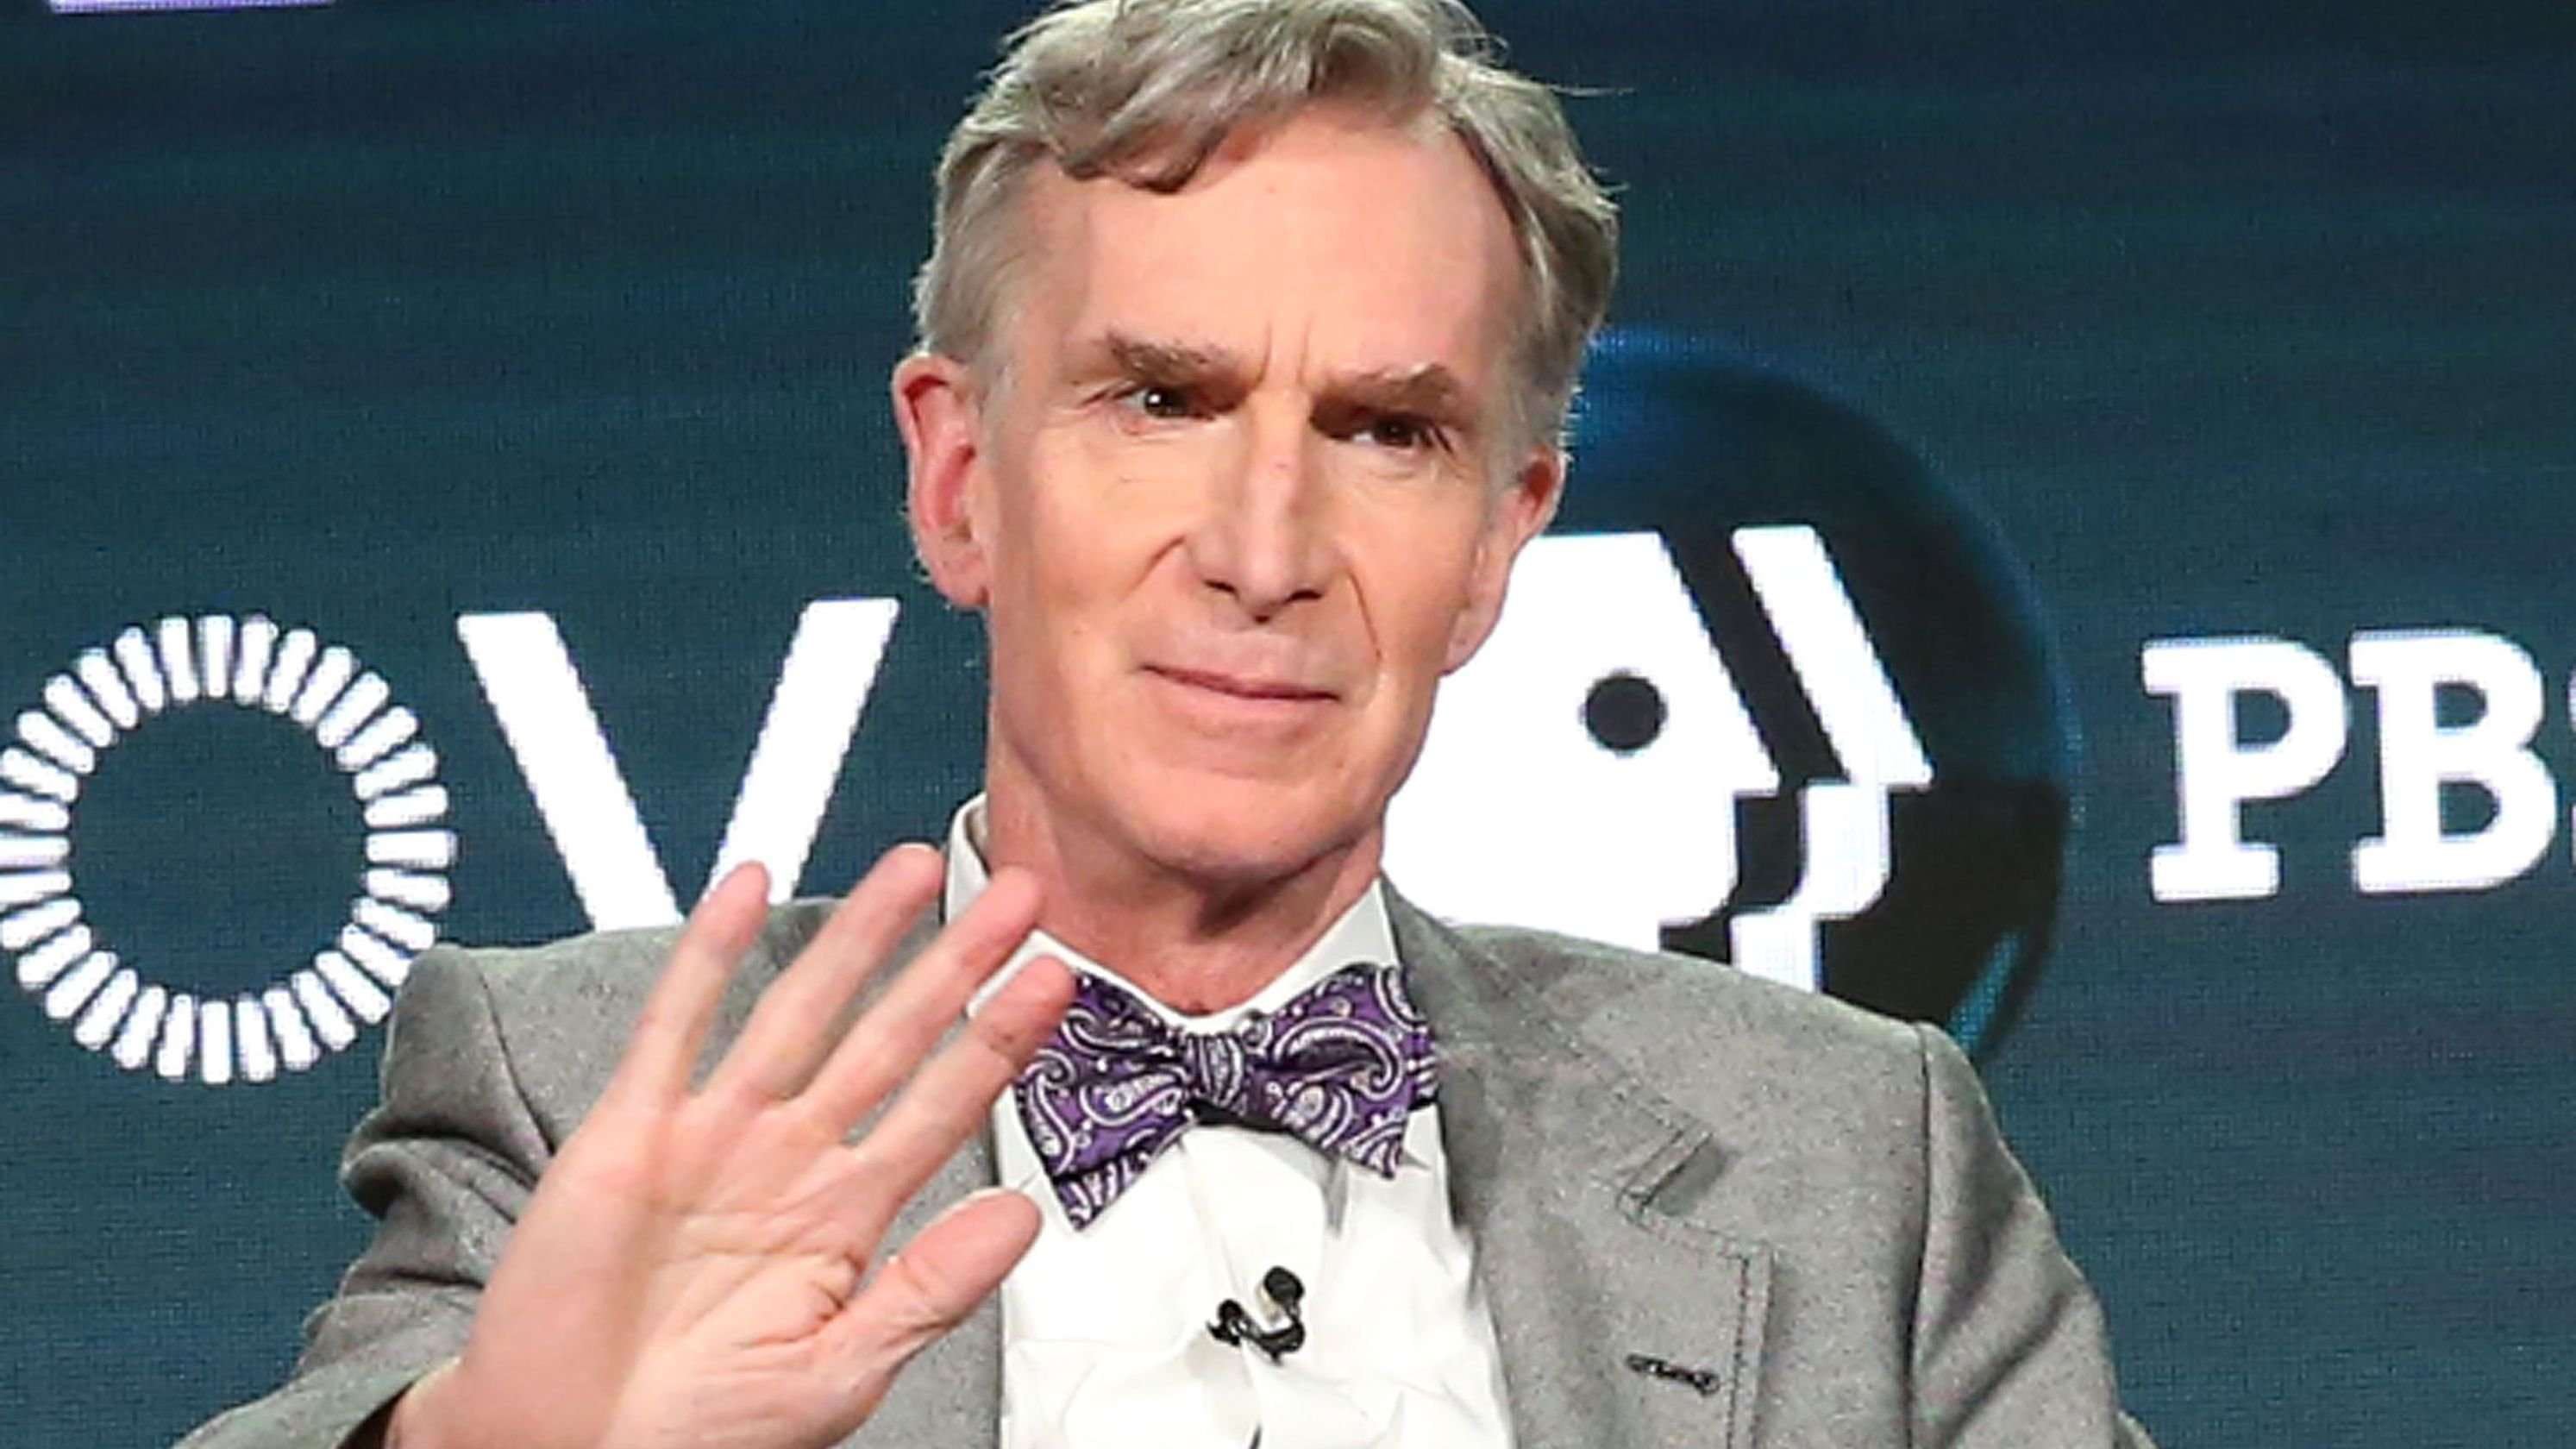 image for Bill Nye: We are not going to live on Mars, let alone turn it into Earth